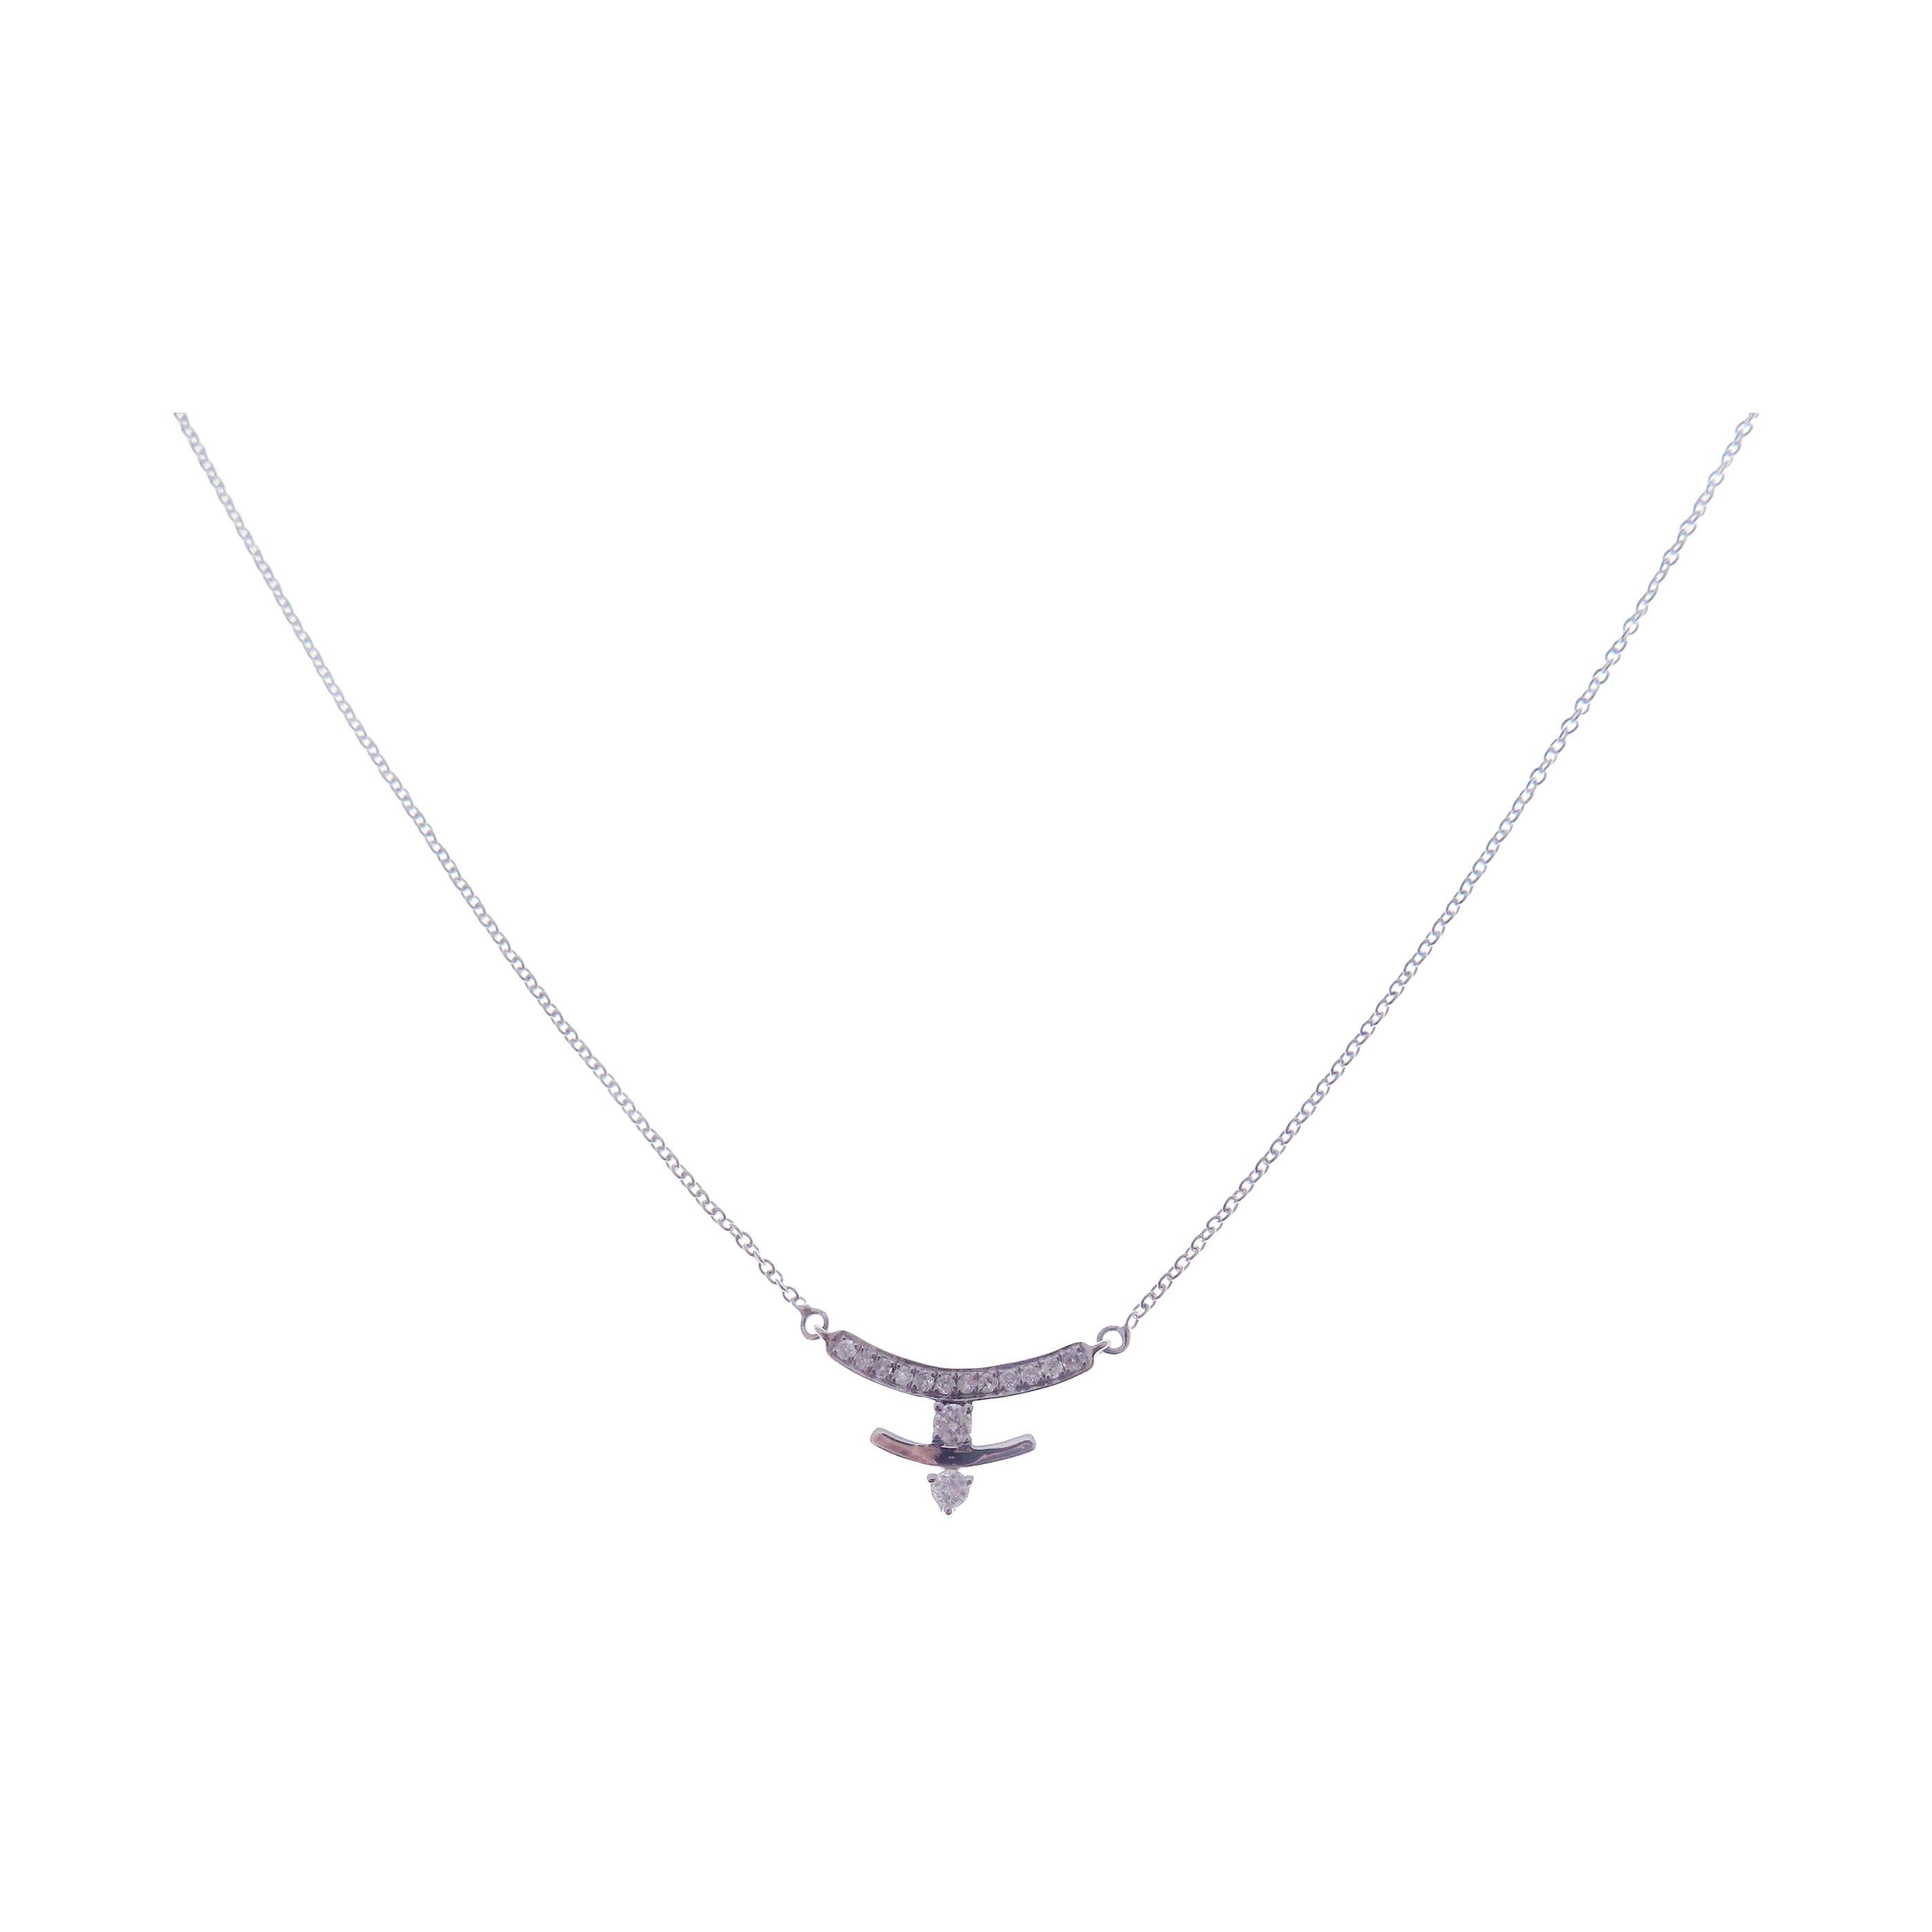 This bent necklace is crafted in 18-karat white gold, weighing approximately 0.09 total carats of SI-H Quality white diamond. 

Necklace is 16